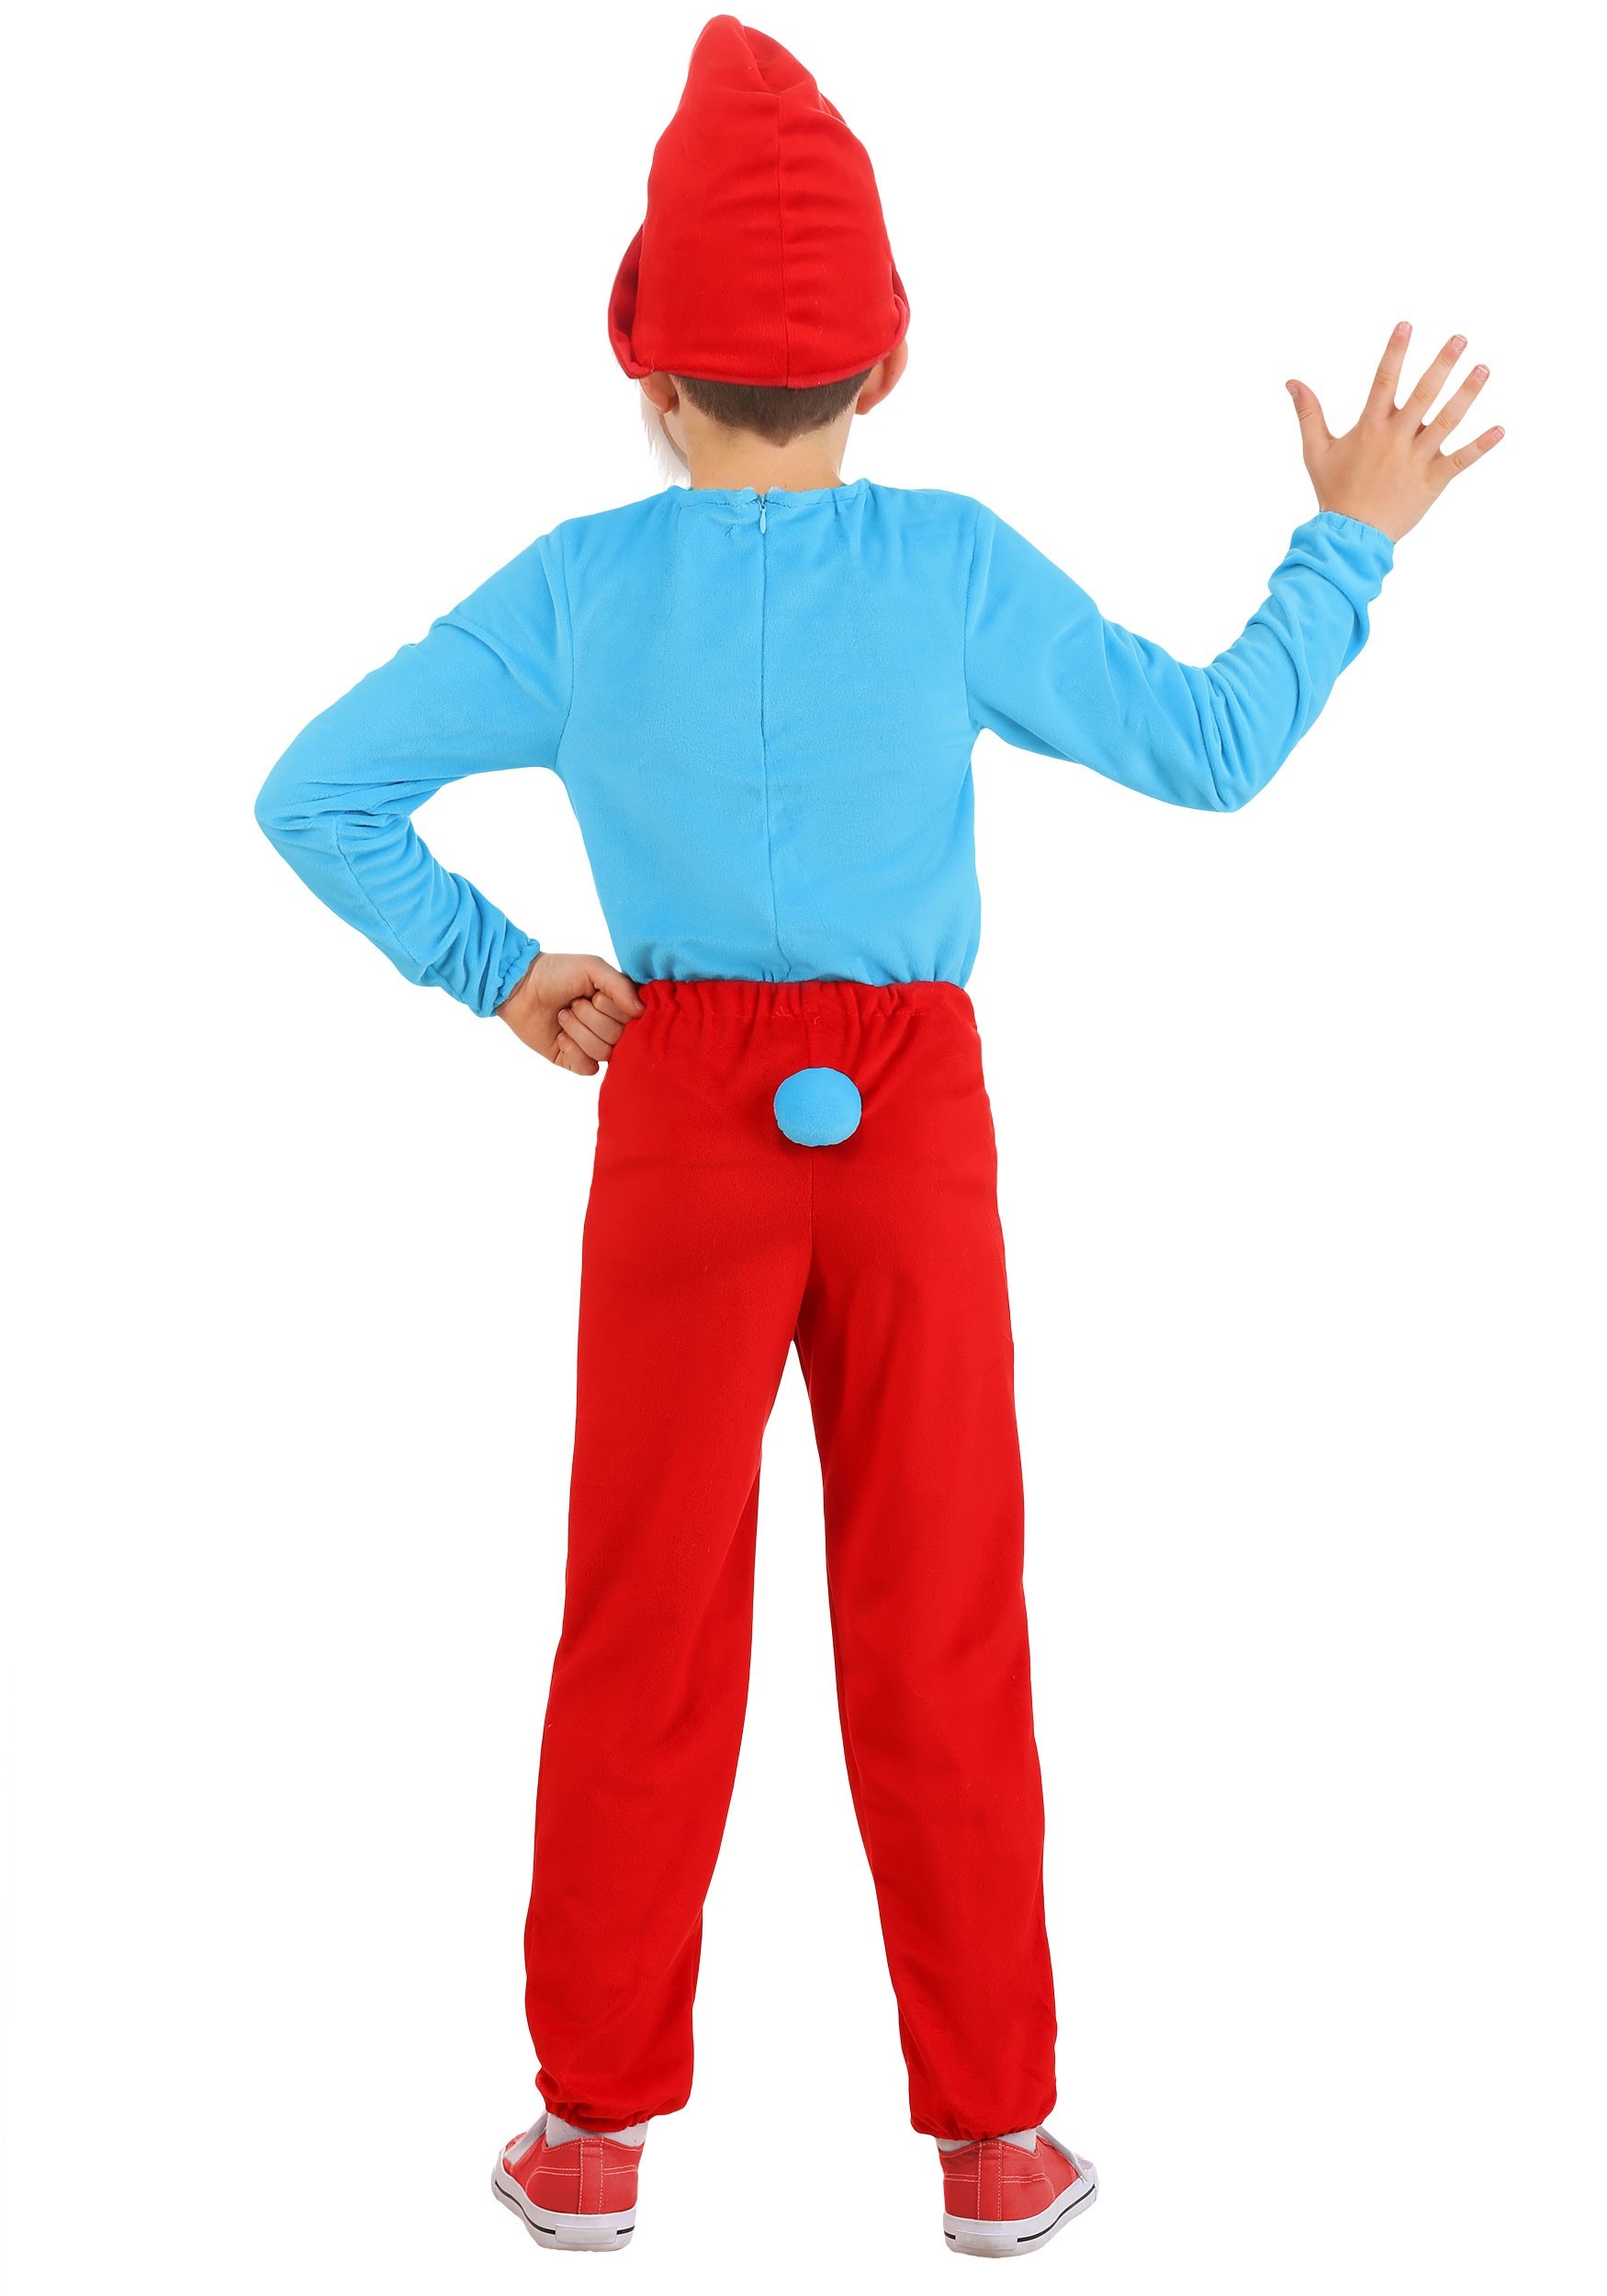 Details about   Smurf The Smurfs Cartoon Character Child Costume medium or Large